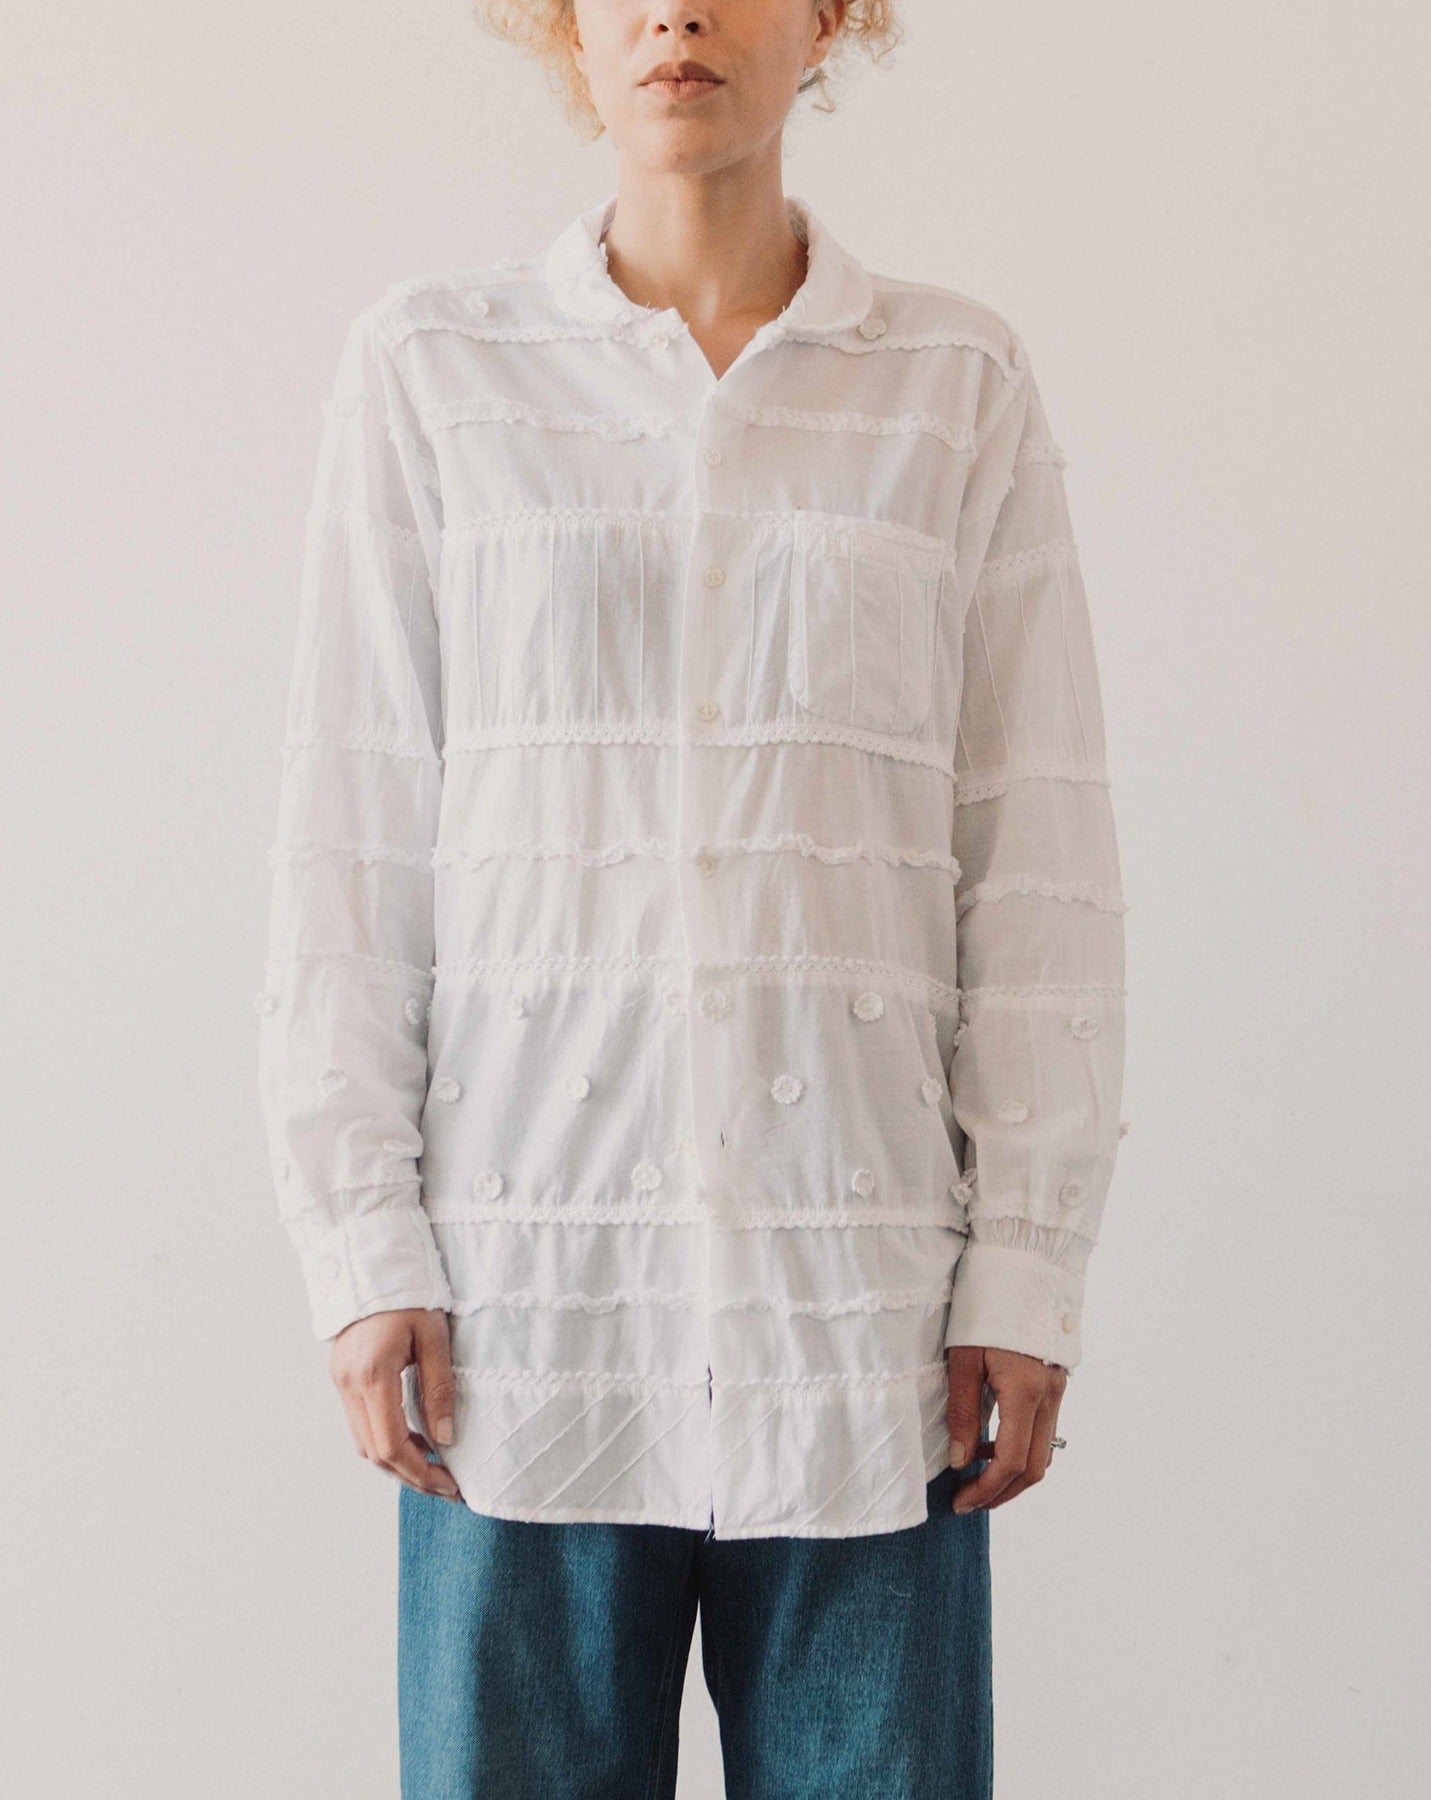 Engineered Garments Patchwork Rounded Collar Shirt, White